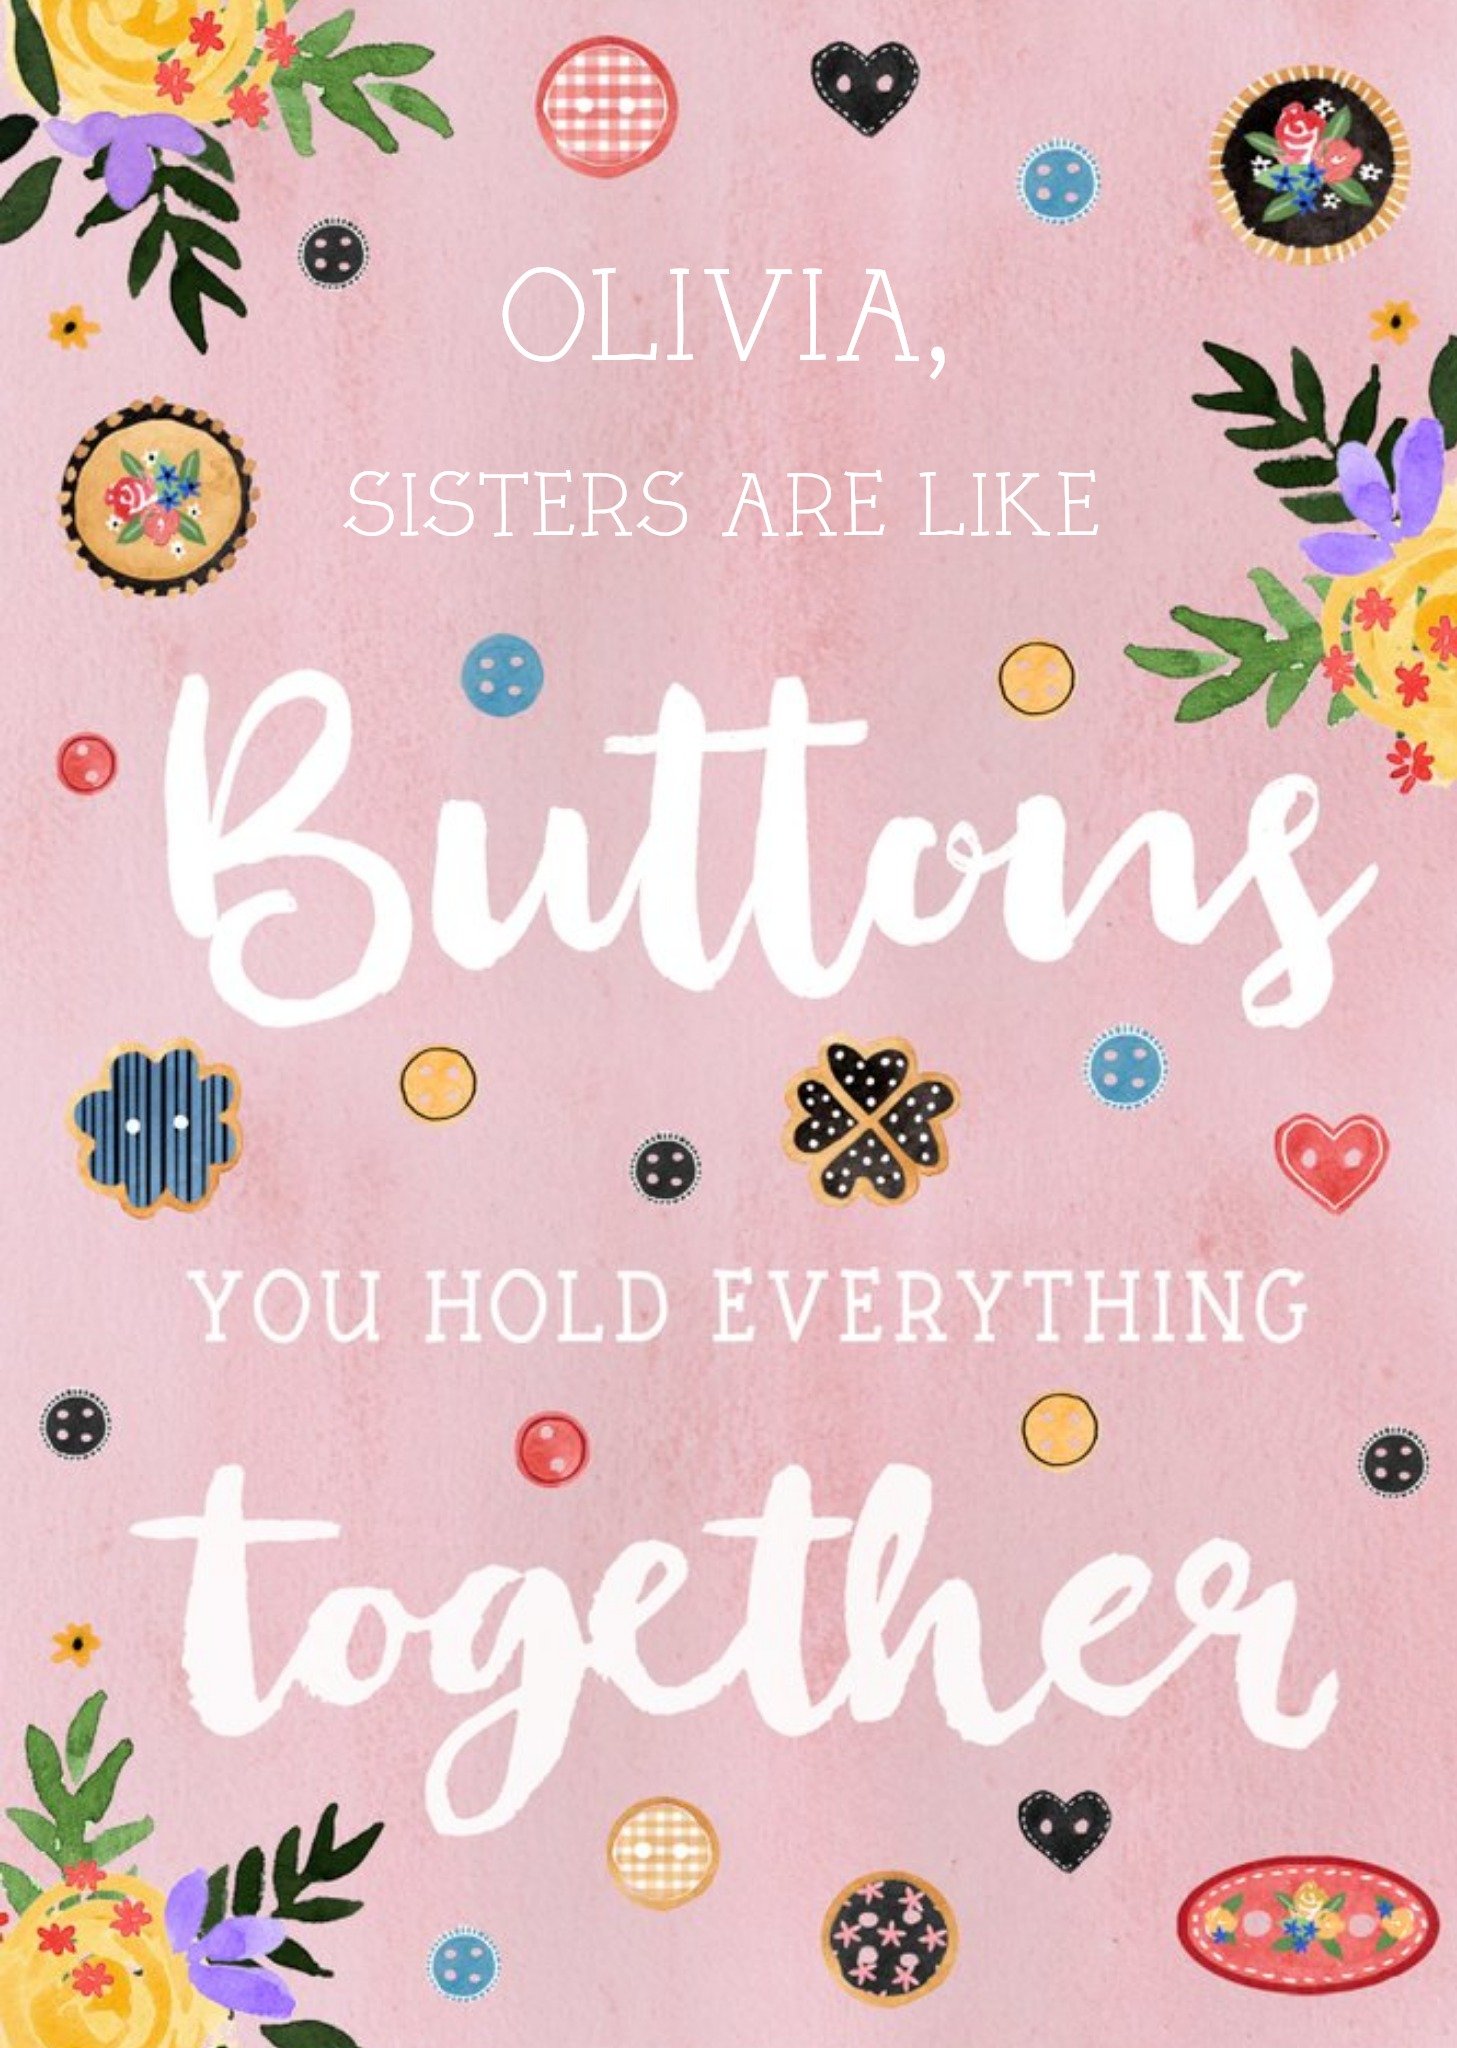 Okey Dokey Design Traditional Illustrated Buttons Hold Everything Together Birthday Card, Large